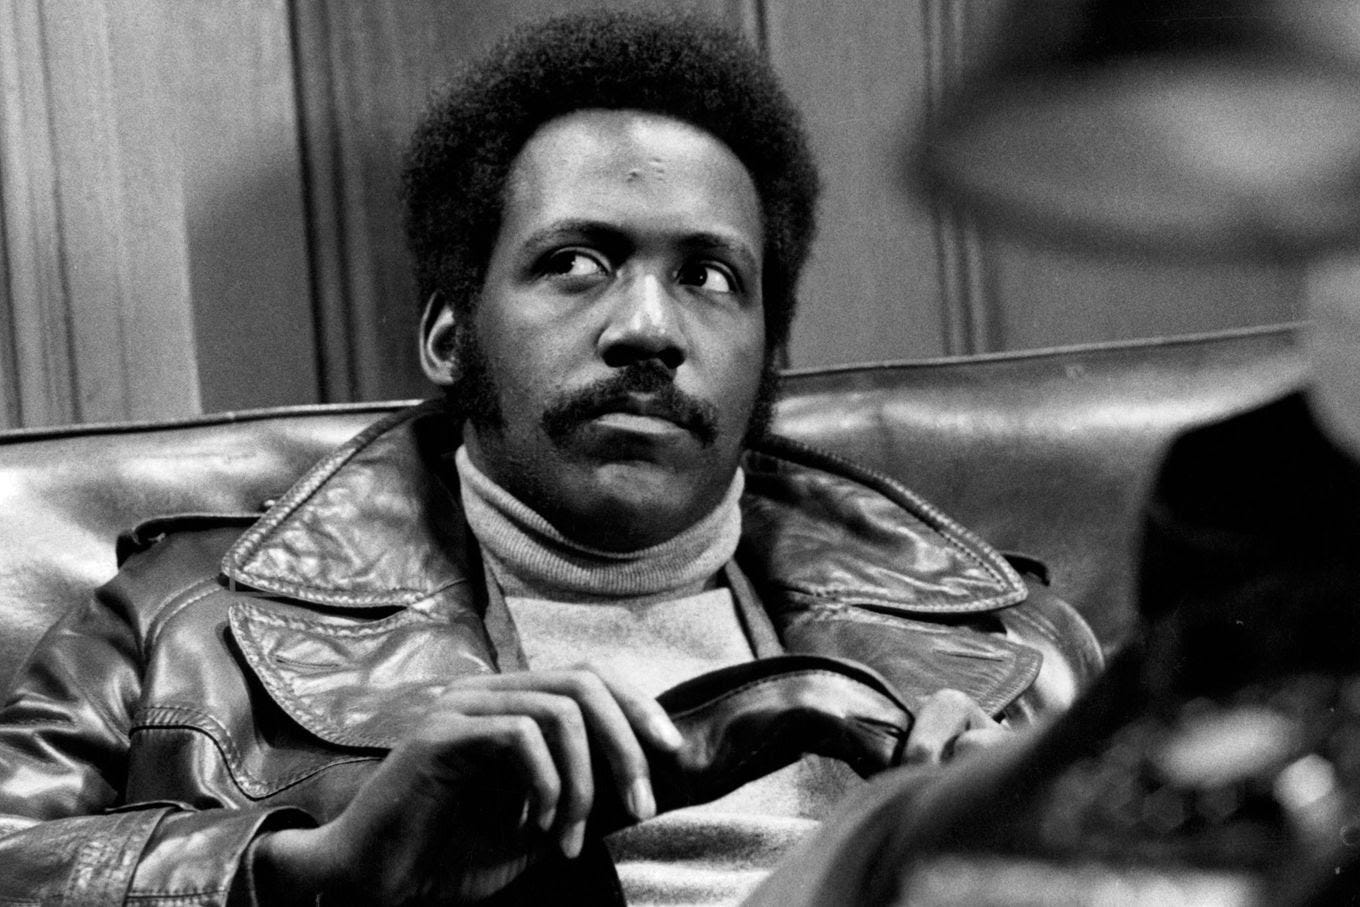 Actor Richard Roundtree, pictured around 1972. (Michael Ochs Archives/Getty Images)